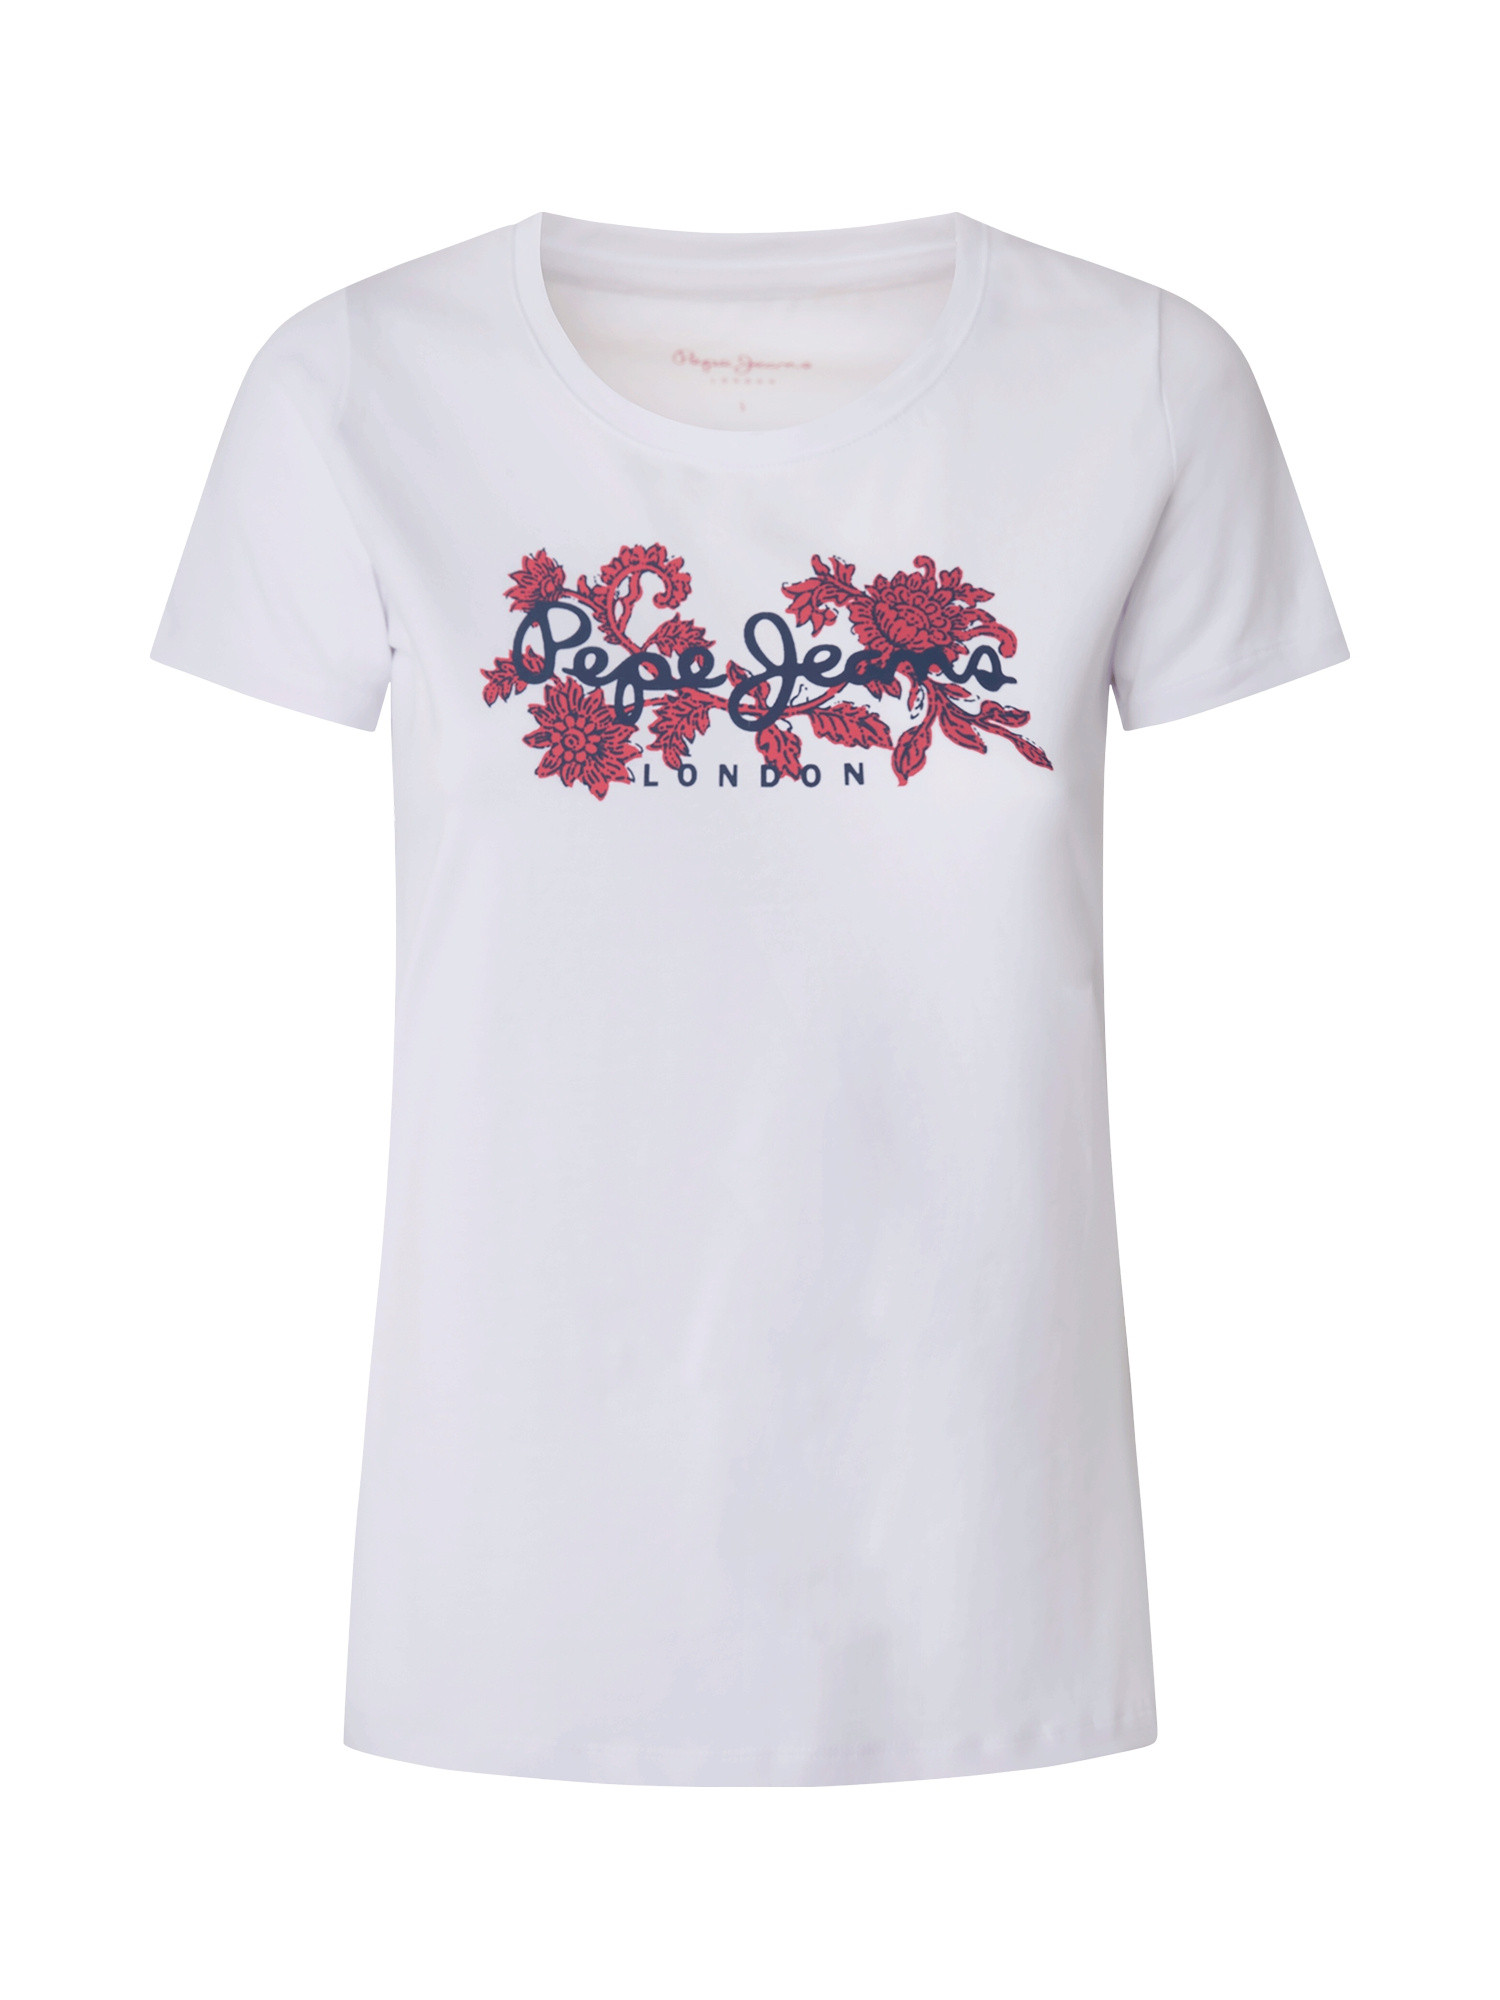 Pepe Jeans - T-shirt with print, White, large image number 0